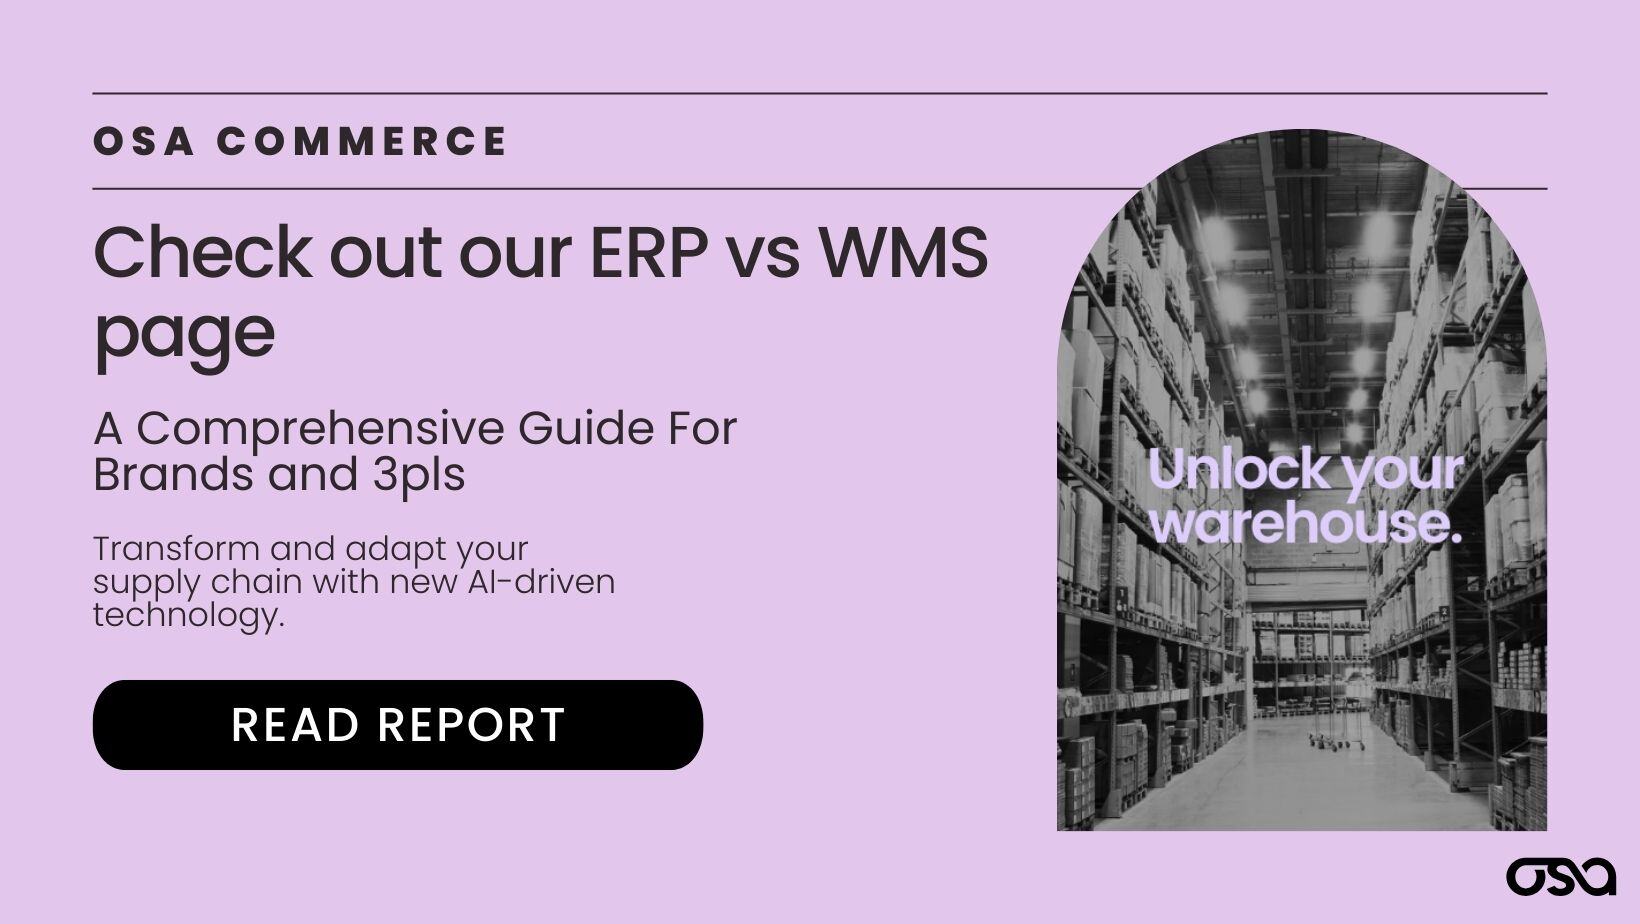 Compare ERP vs WMS for your supply chain